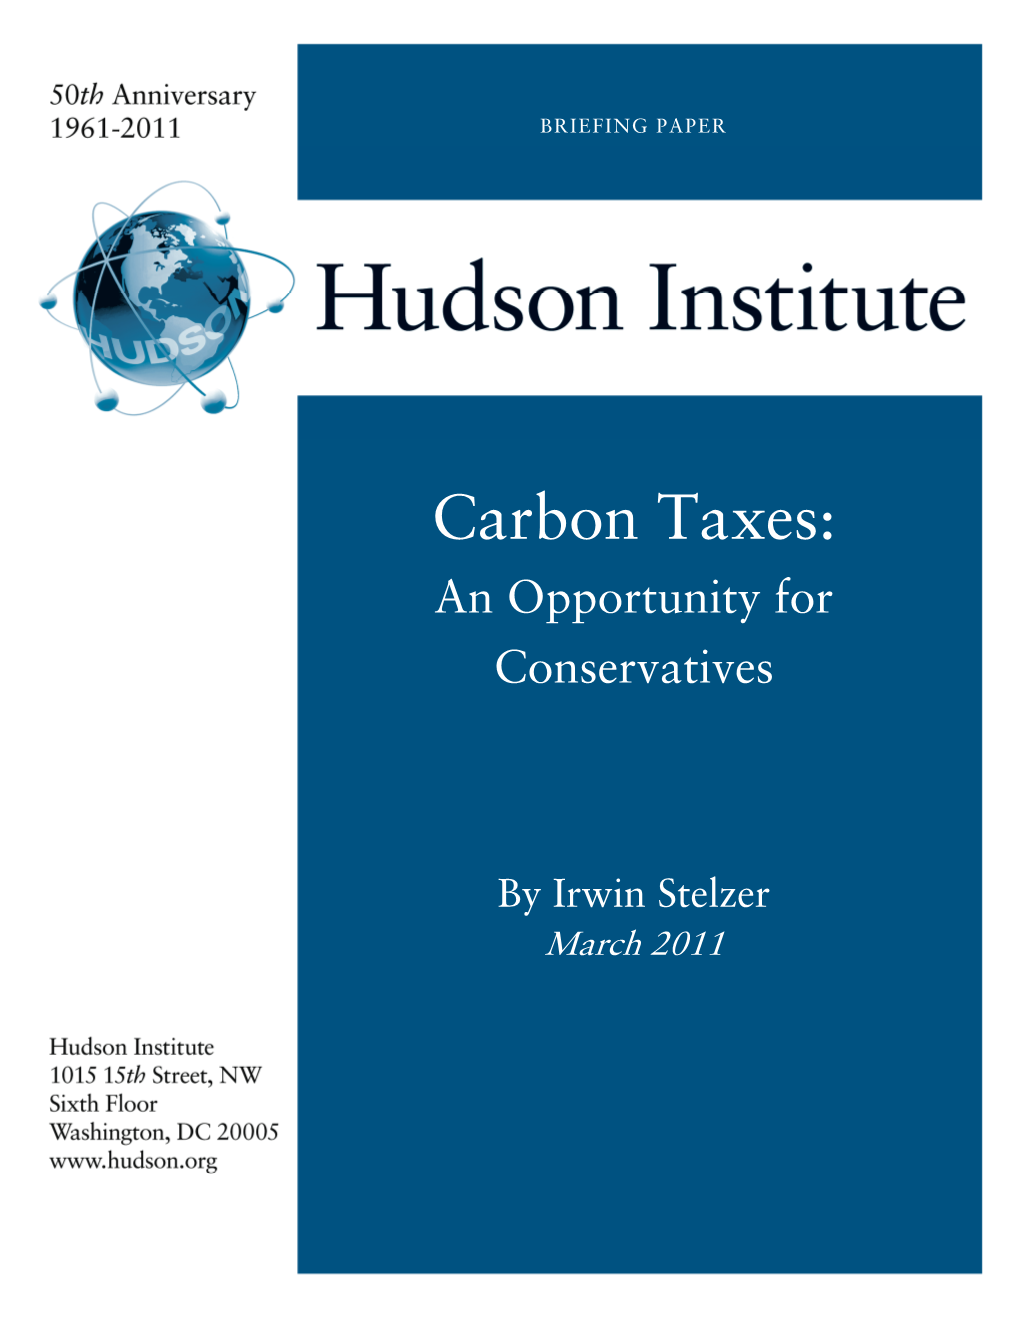 Carbon Taxes: an Opportunity for Conservatives